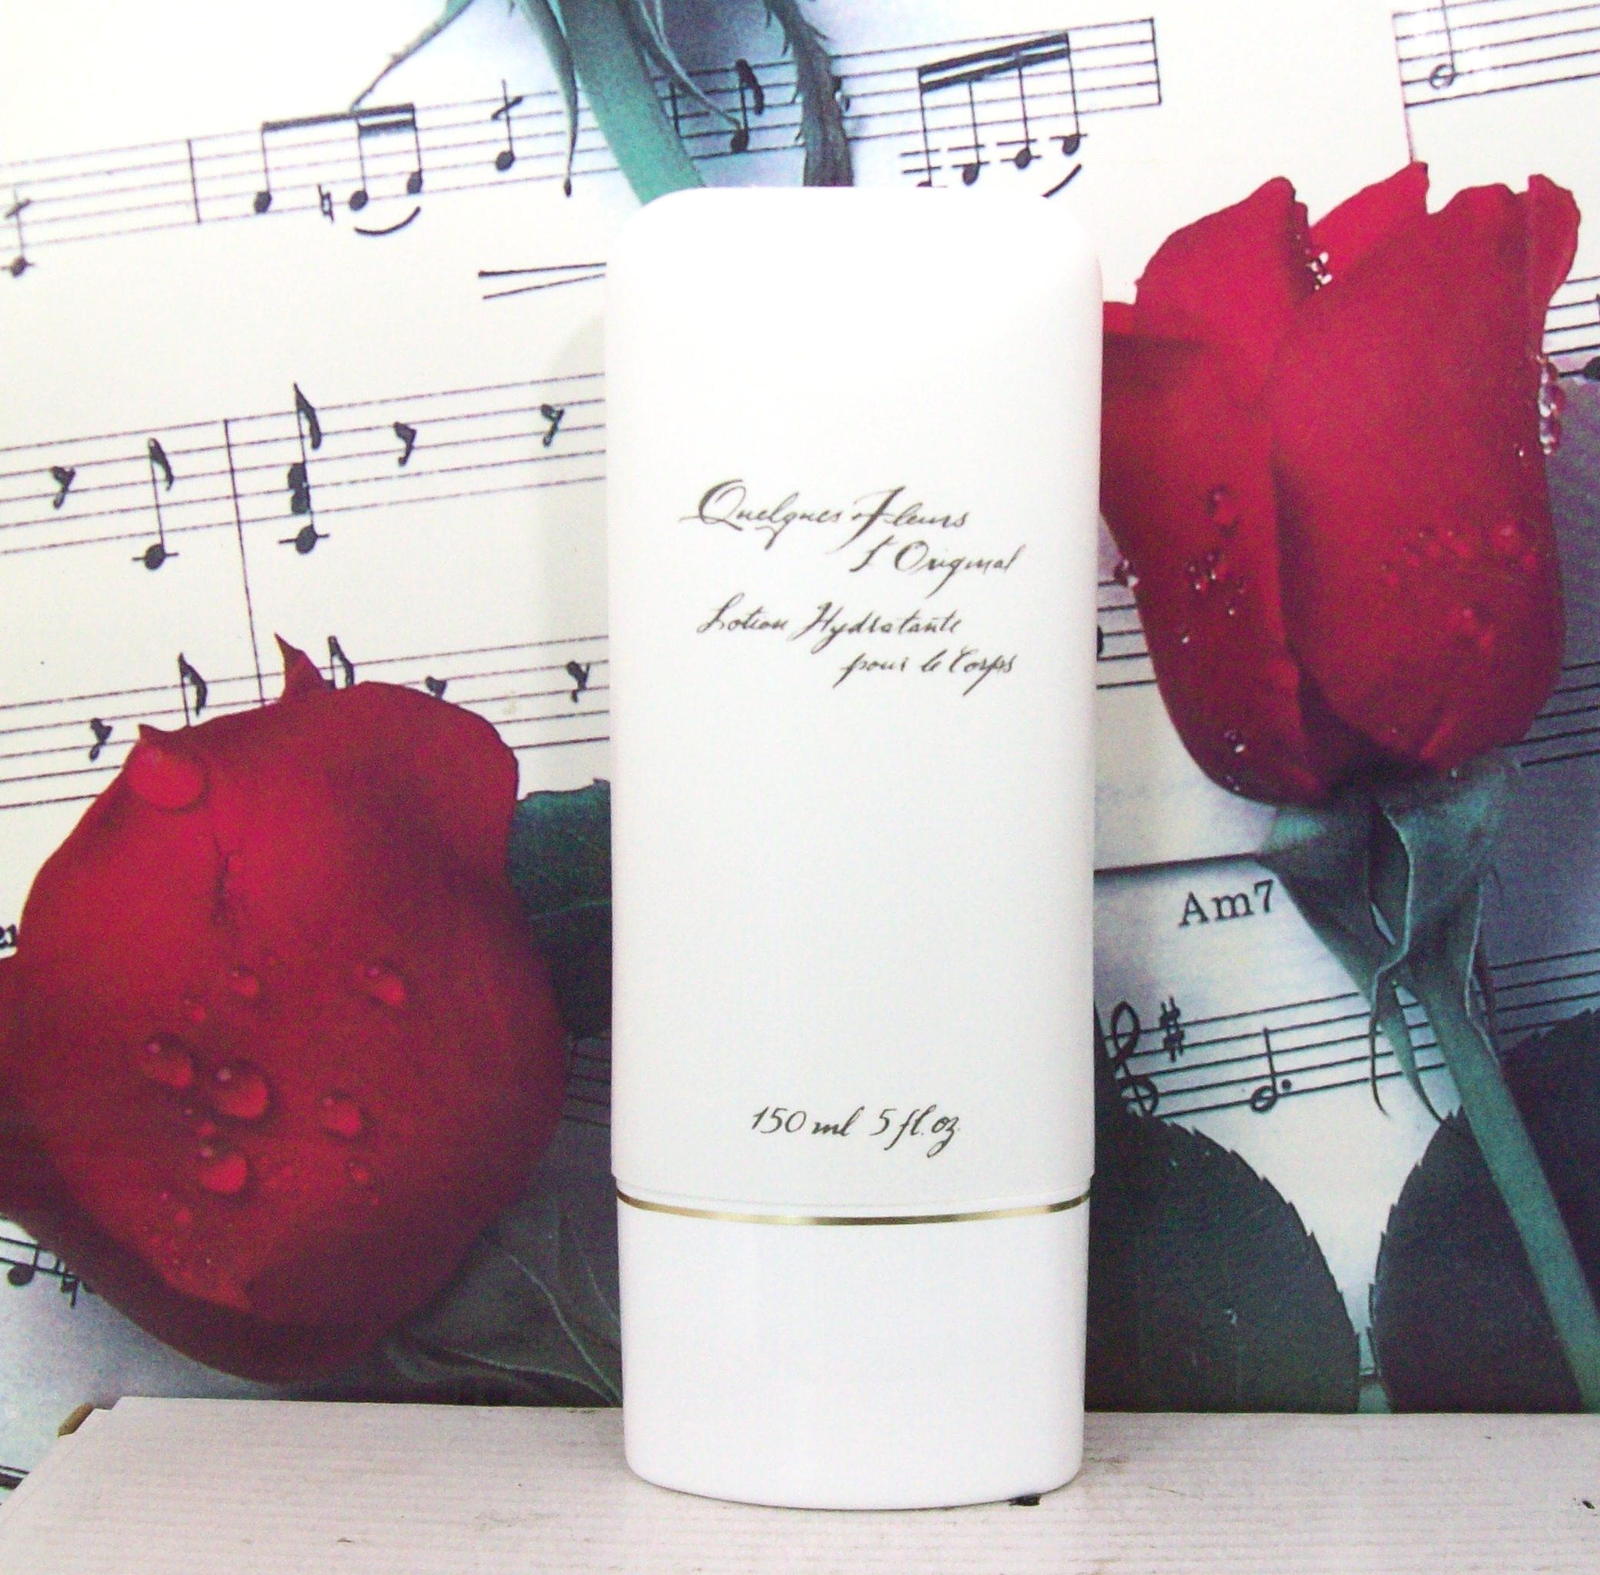 Primary image for Quelques Fleurs Body Lotion 5.0 FL. OZ. By Houbigant 